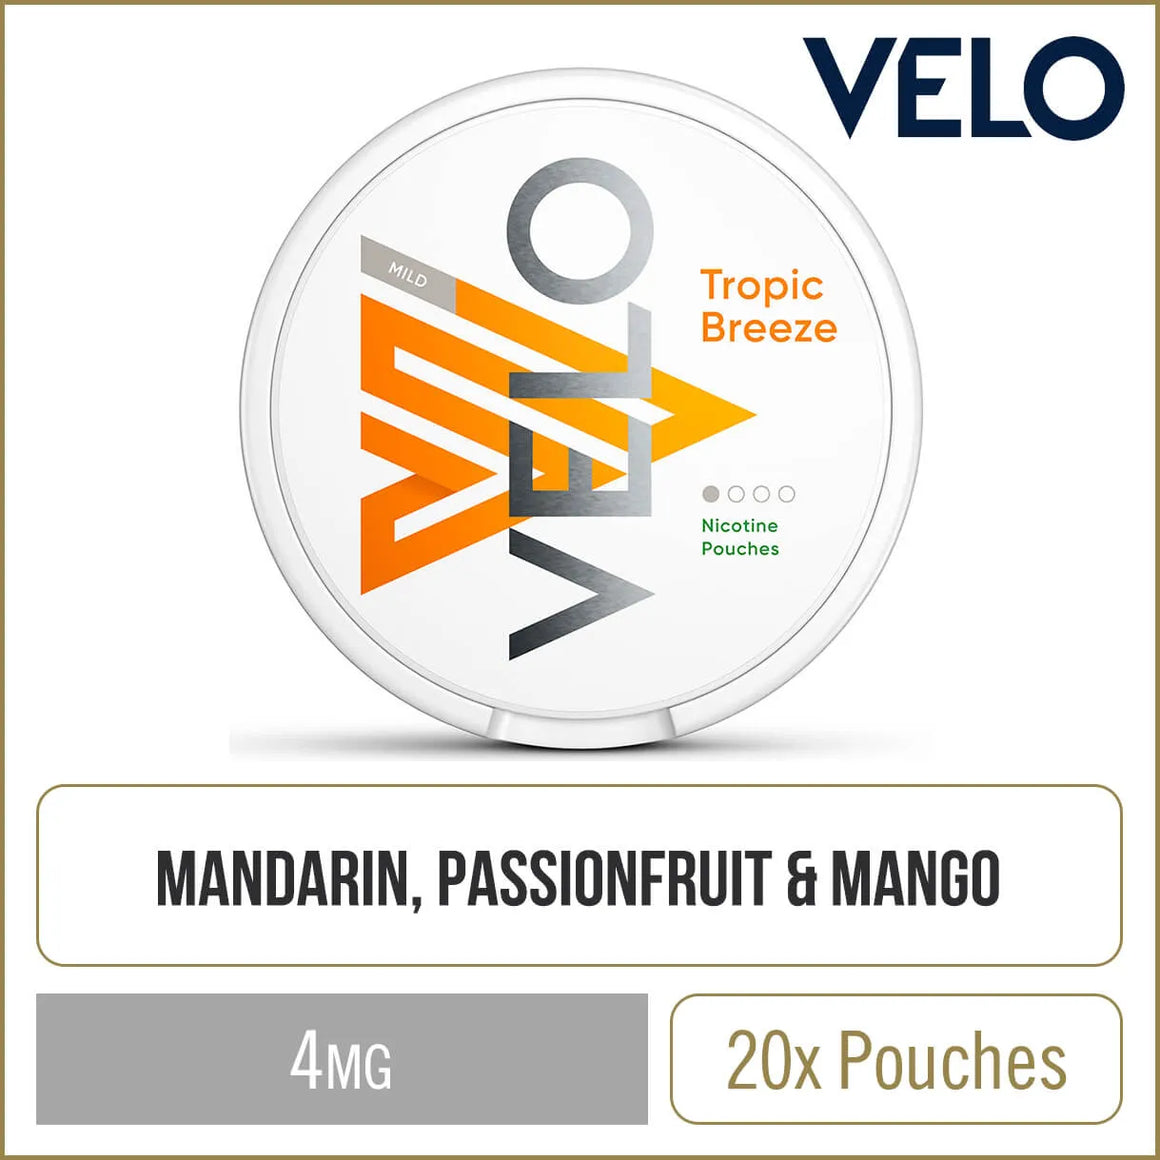 VELO Tropical Breeze Nicotine Pouches 20 Pack